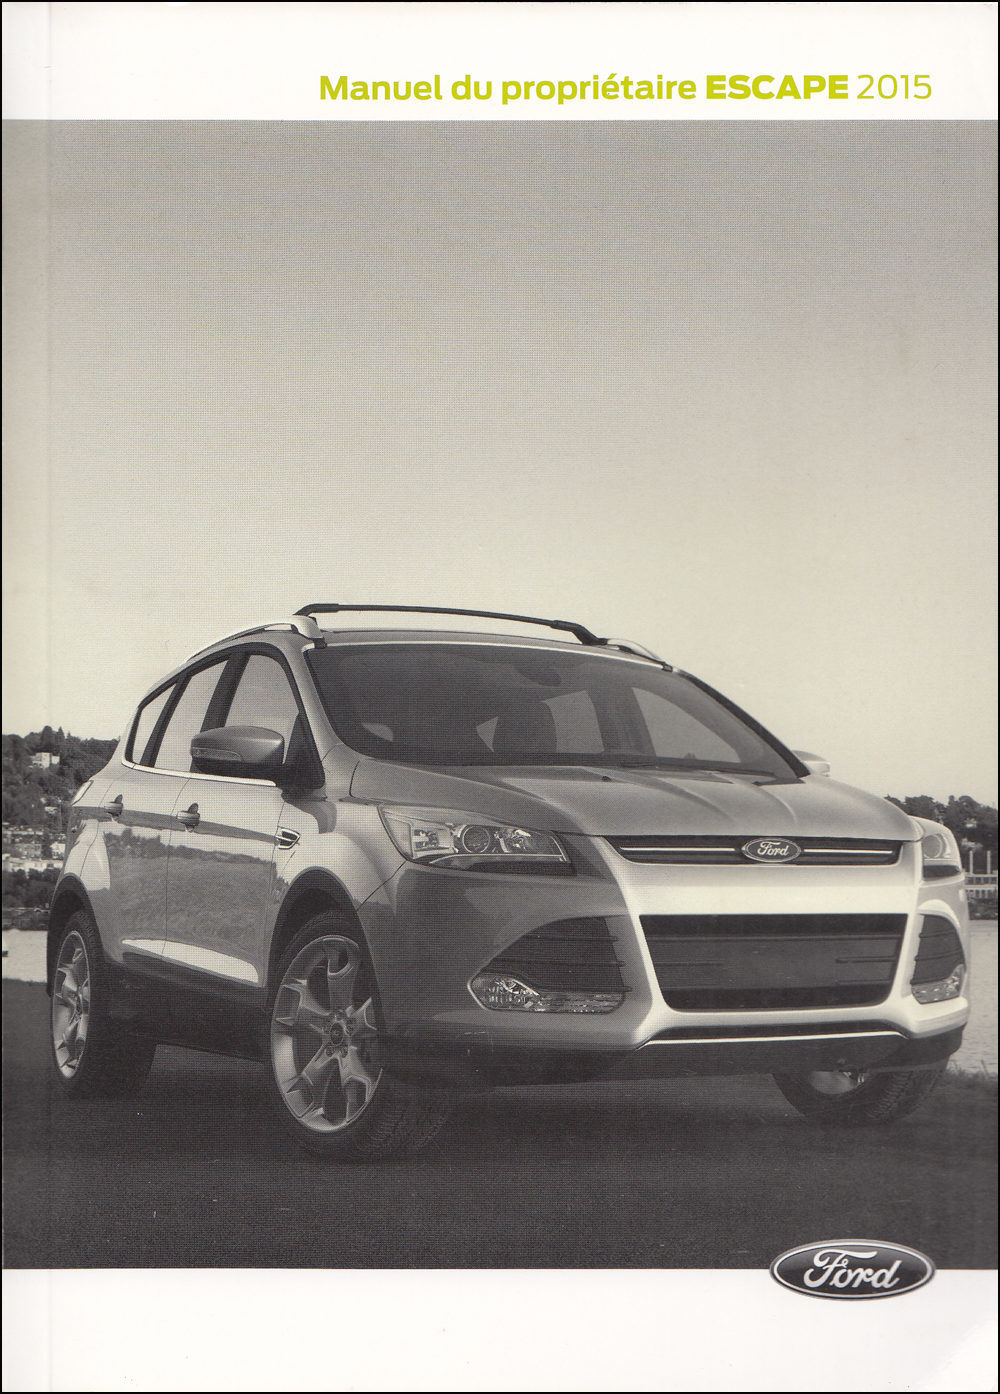 2015 Ford Escape Owner's Manual Original FRENCH Language Canadian